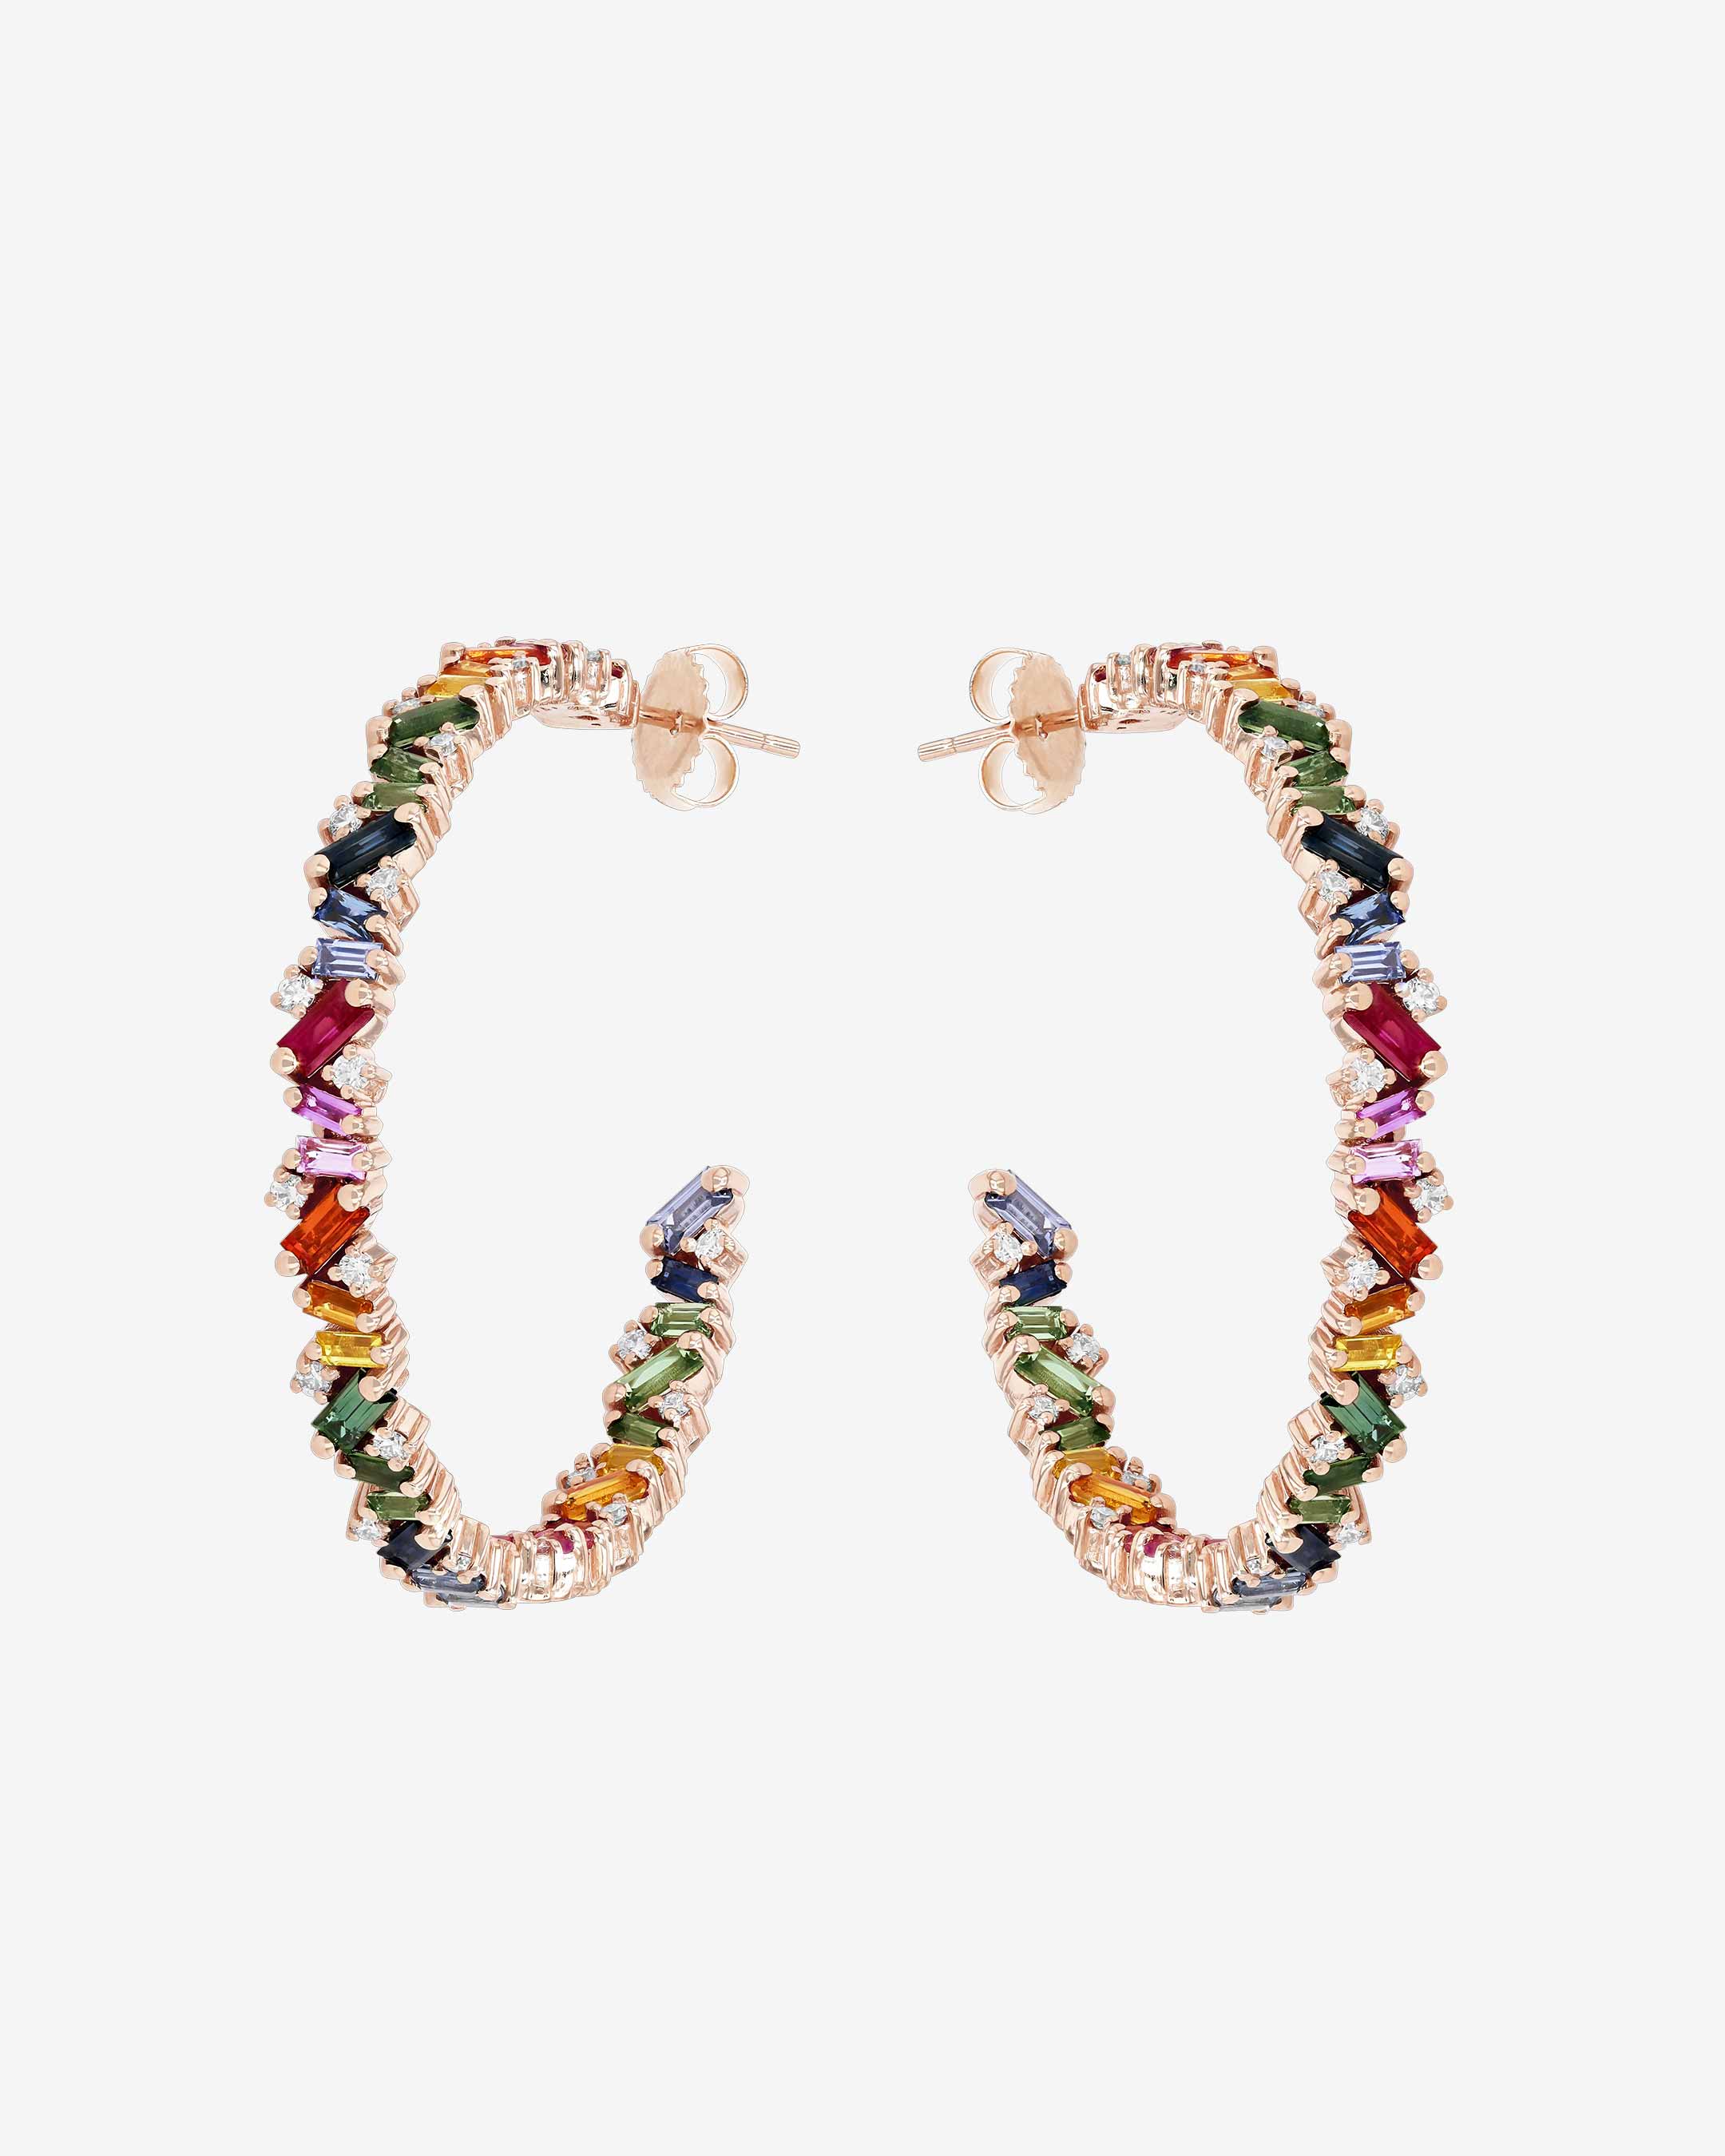 Suzanne Kalan Frenzy Rainbow Sapphire Milli Hoops in 18k rose gold